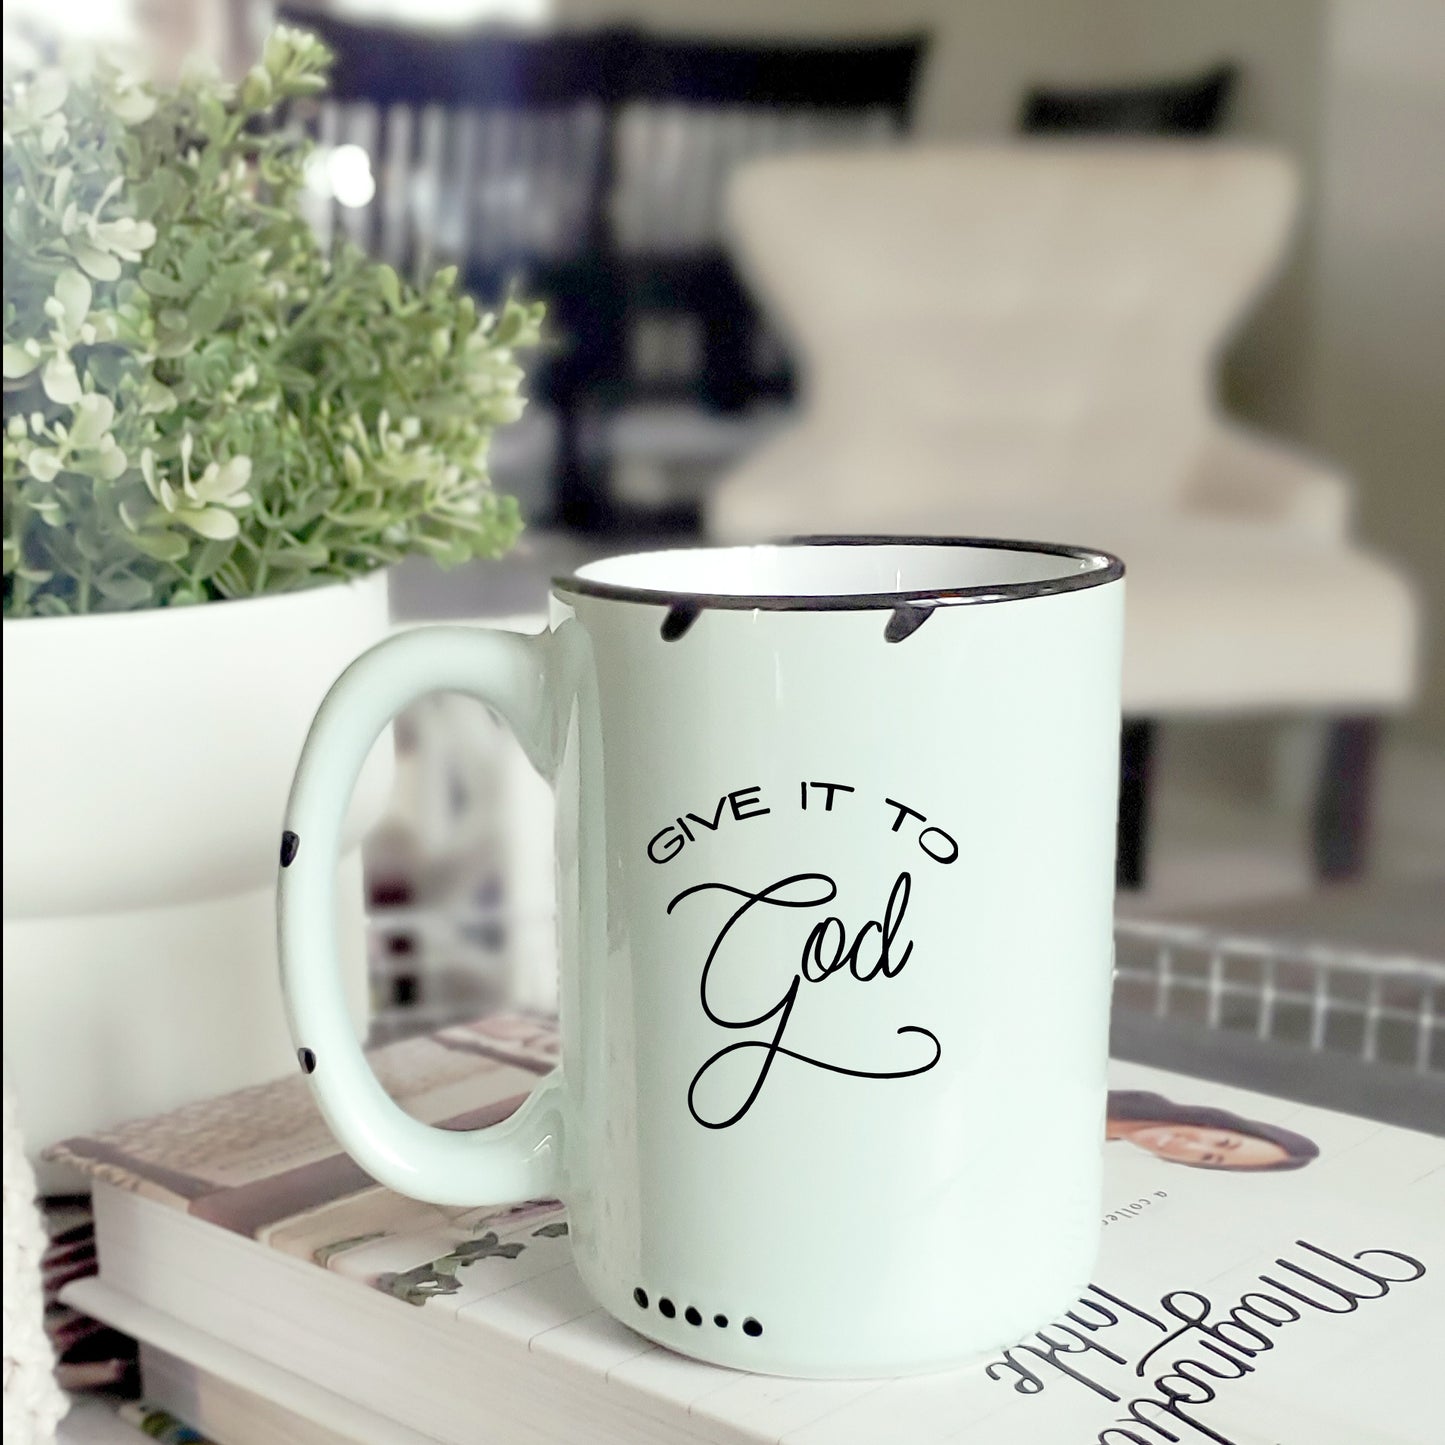 Give it to God Rustic Chipped Ceramic Mug